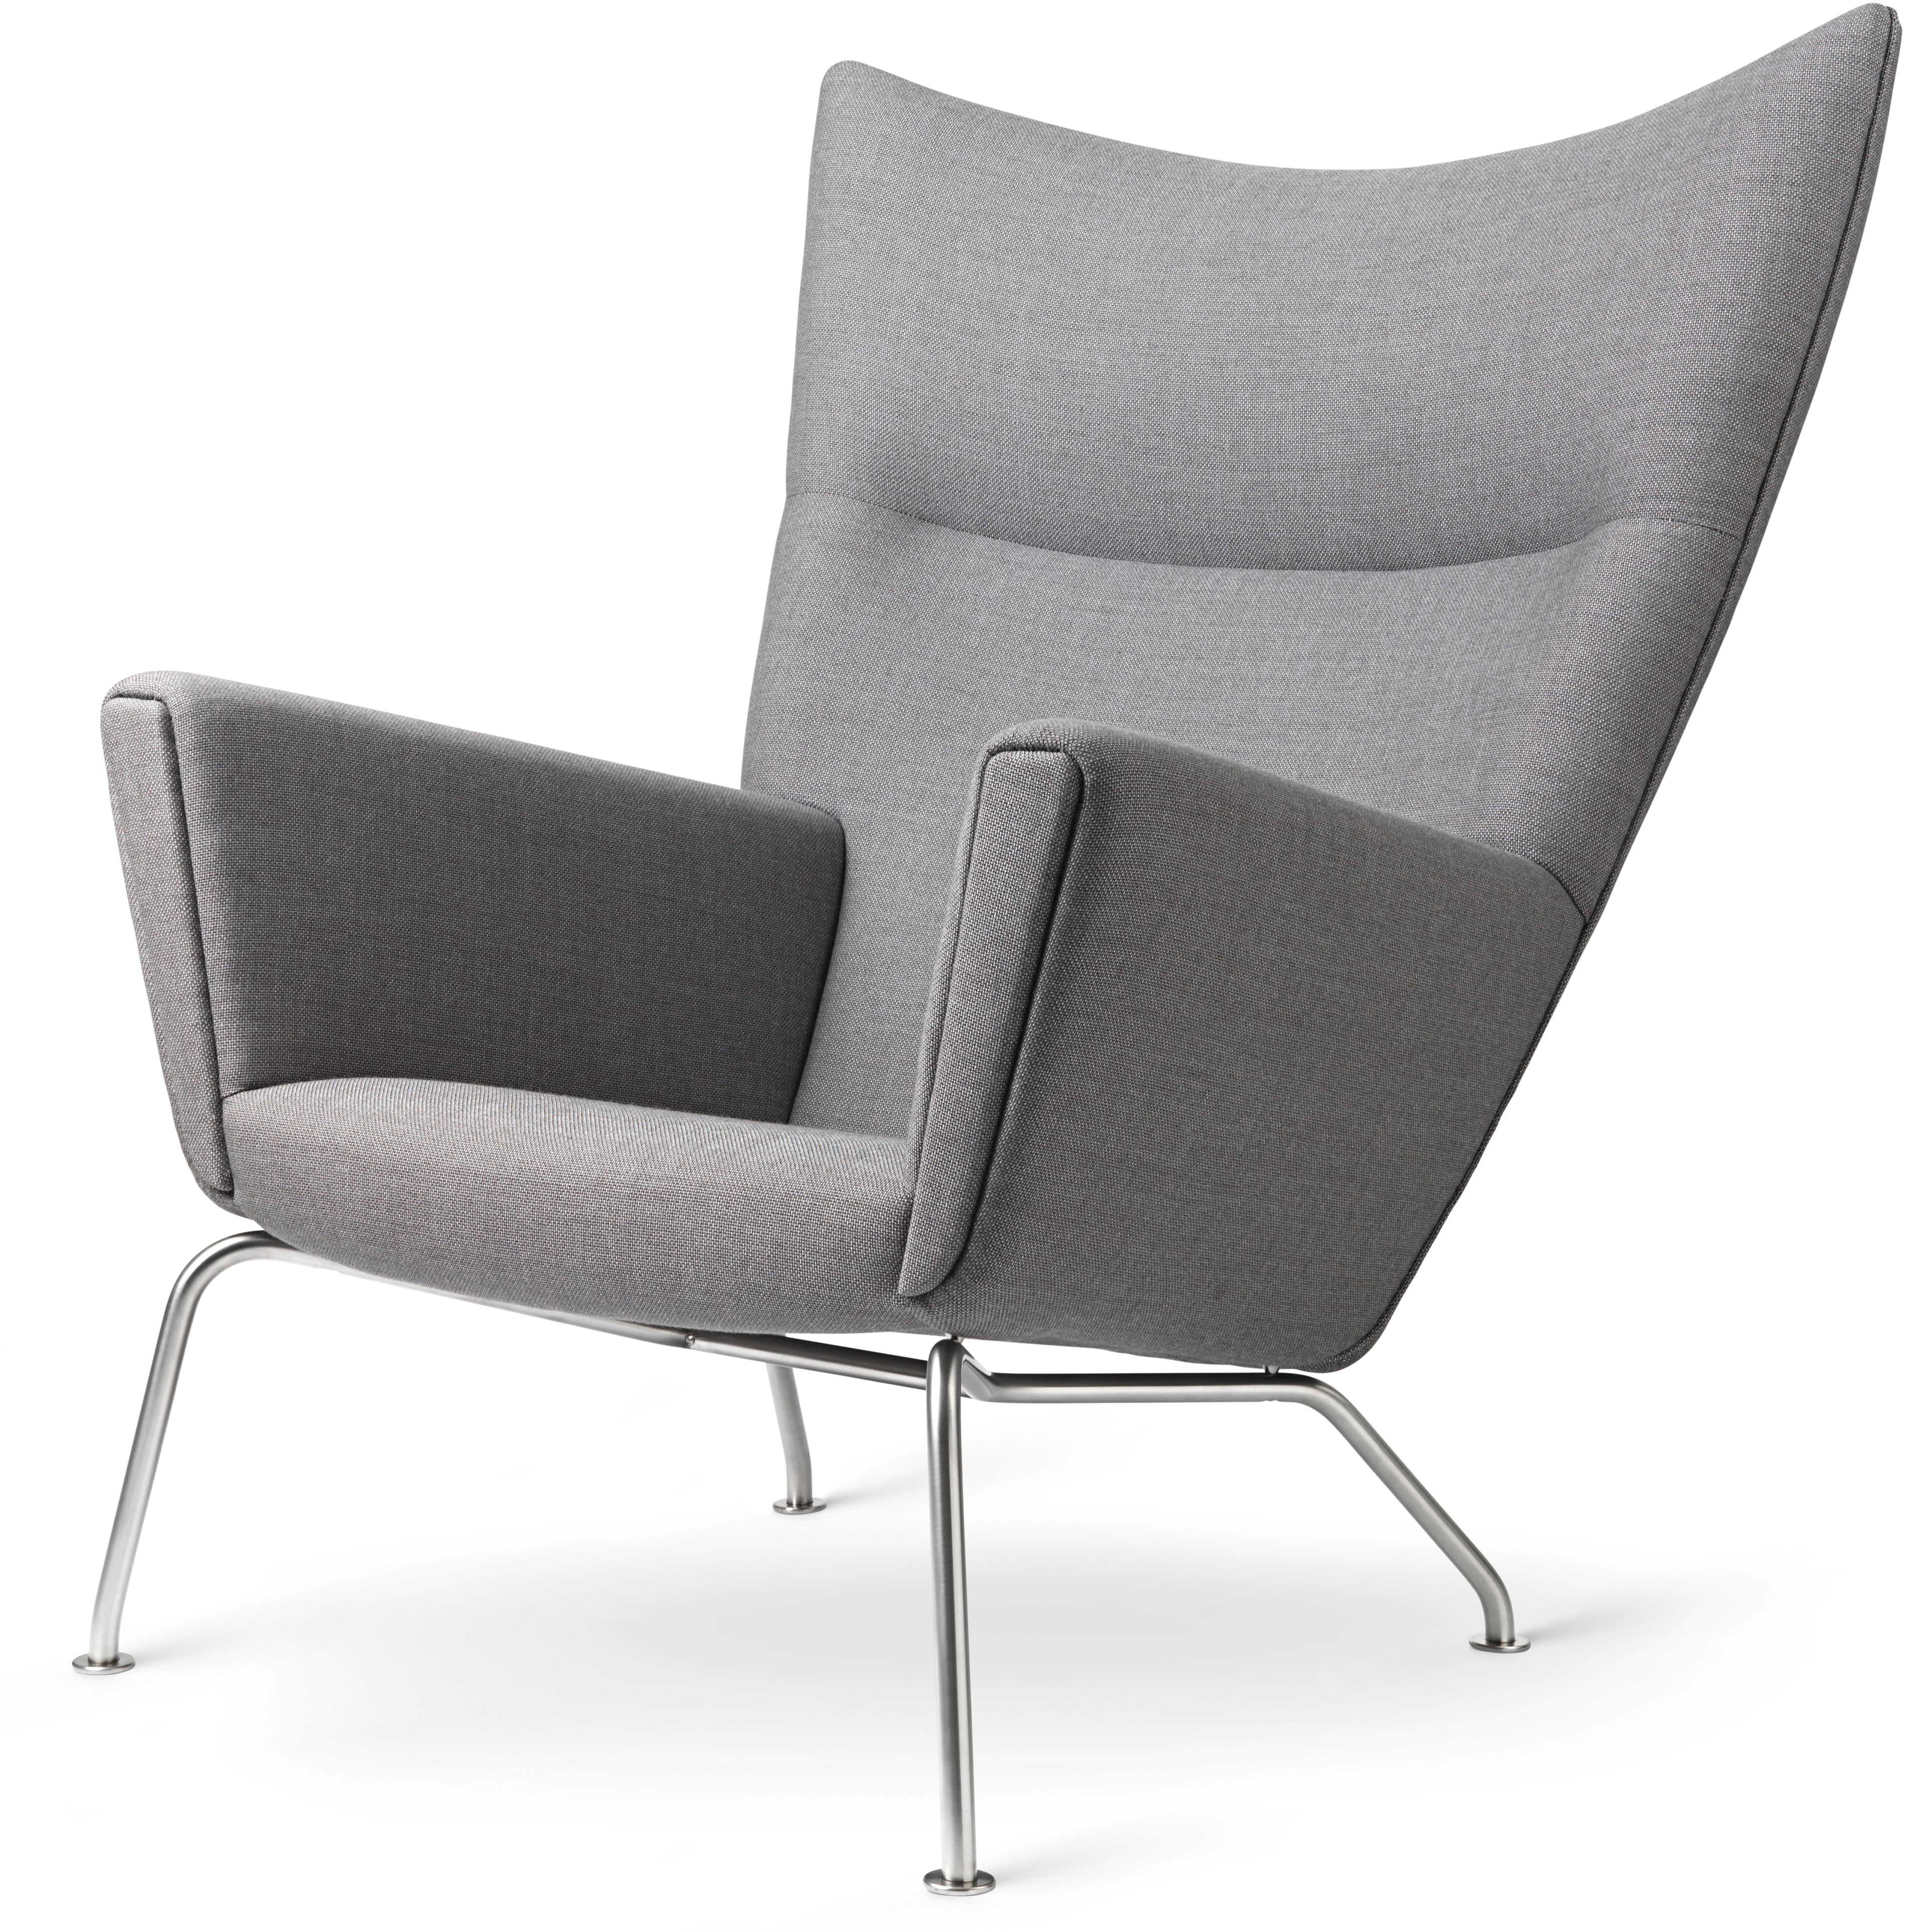 CH445 Wing Chair Passion 6101 Limited Edition Carl Hansen & Søn